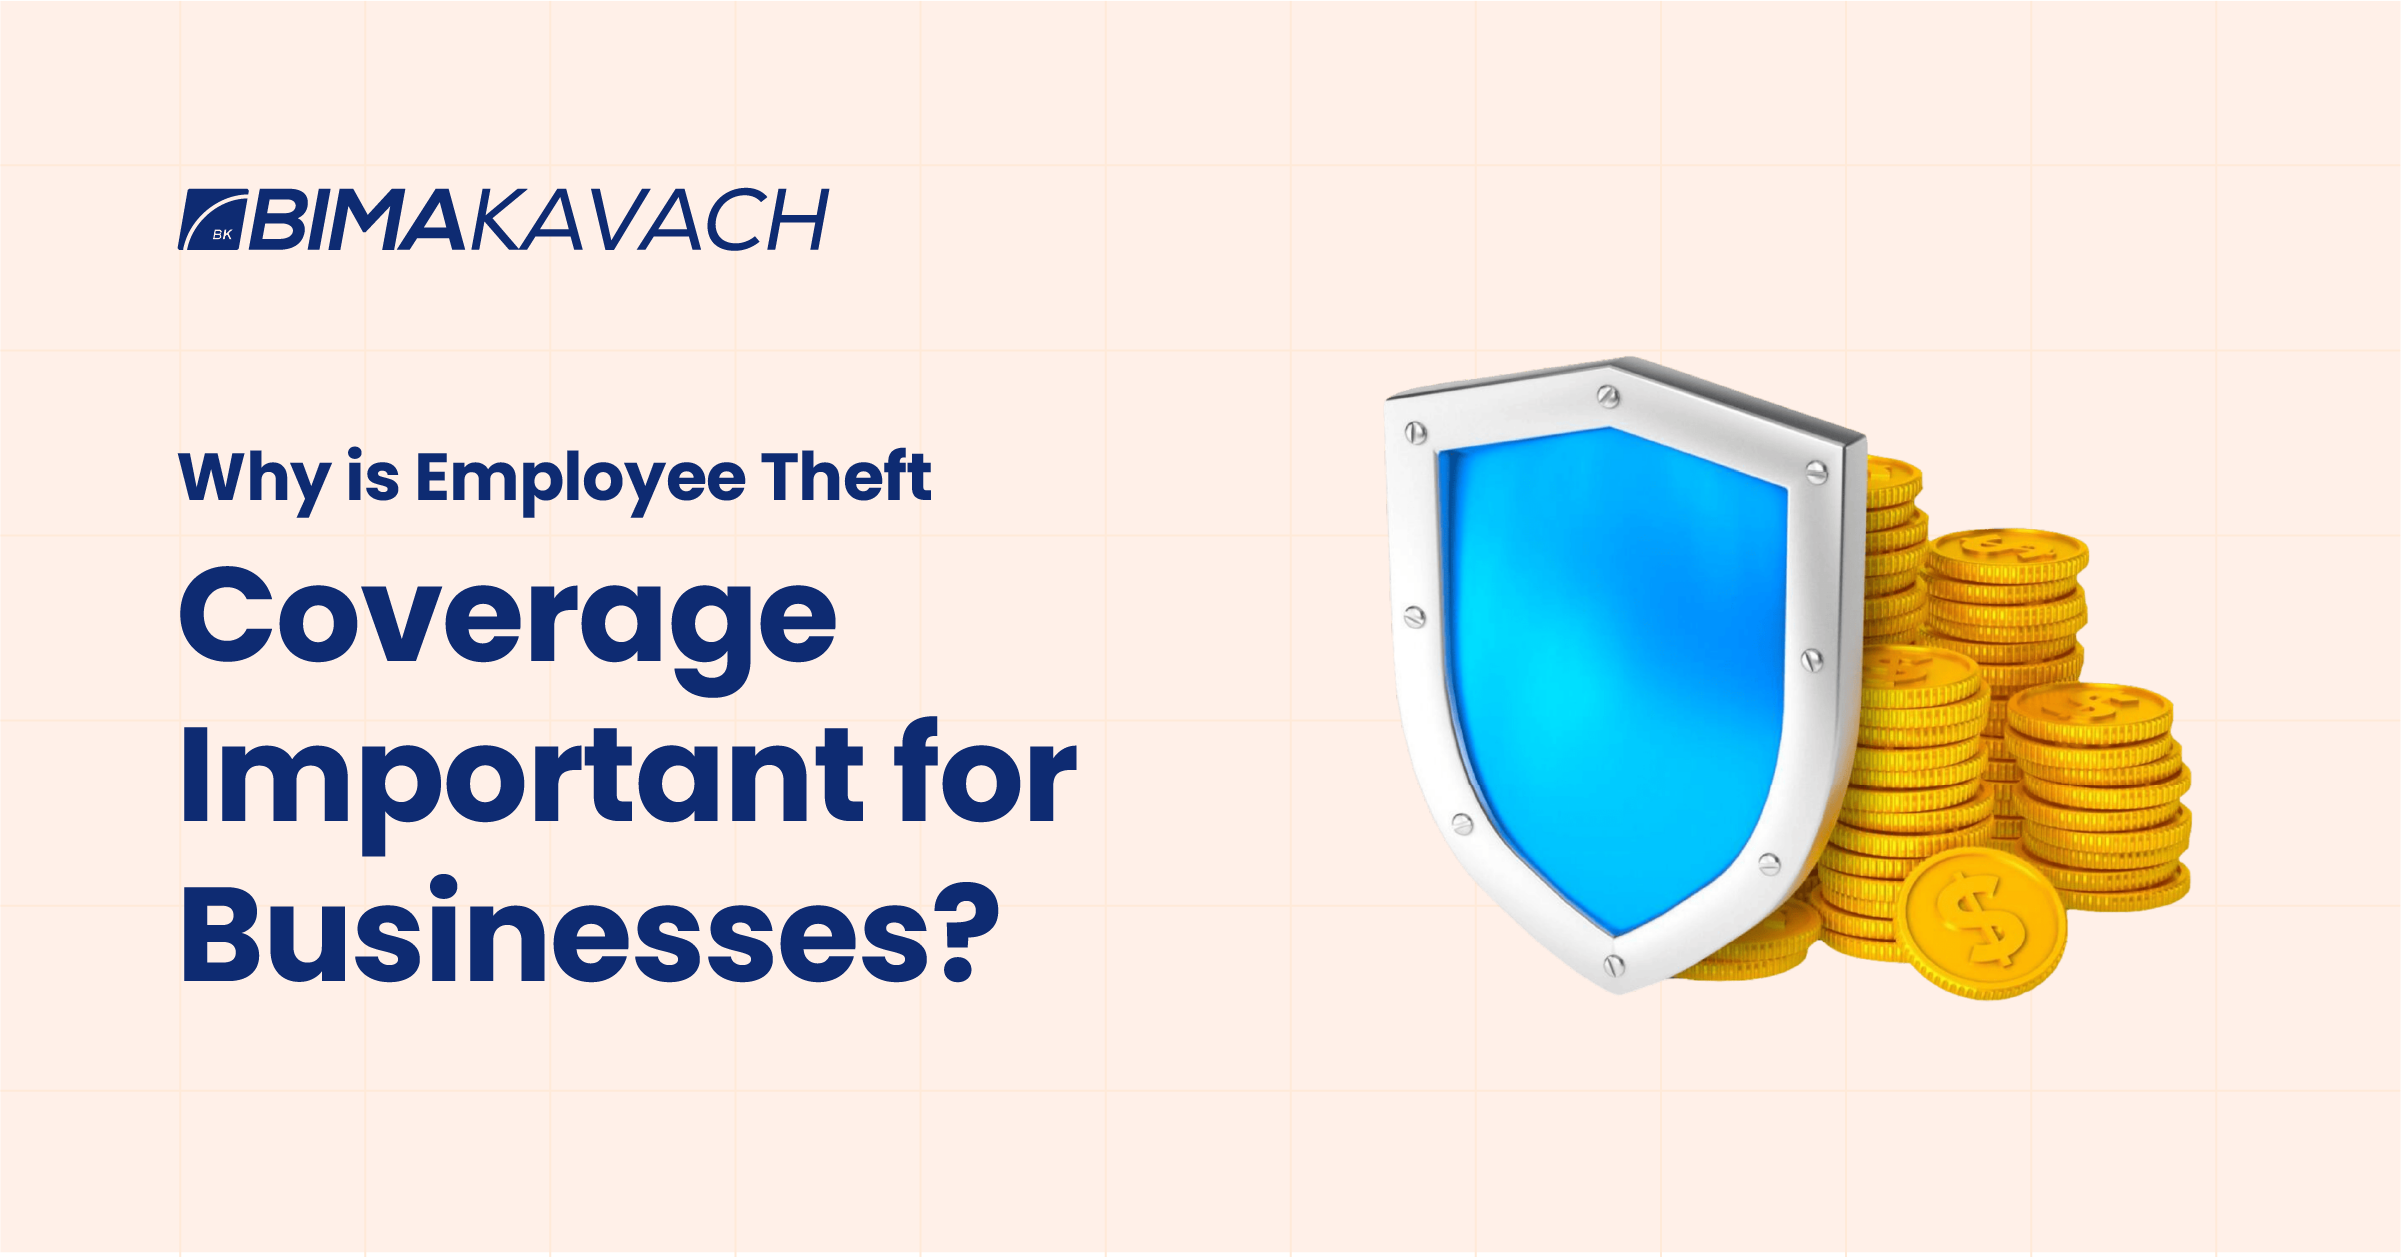 Why is Employee Theft Coverage important for businesses?